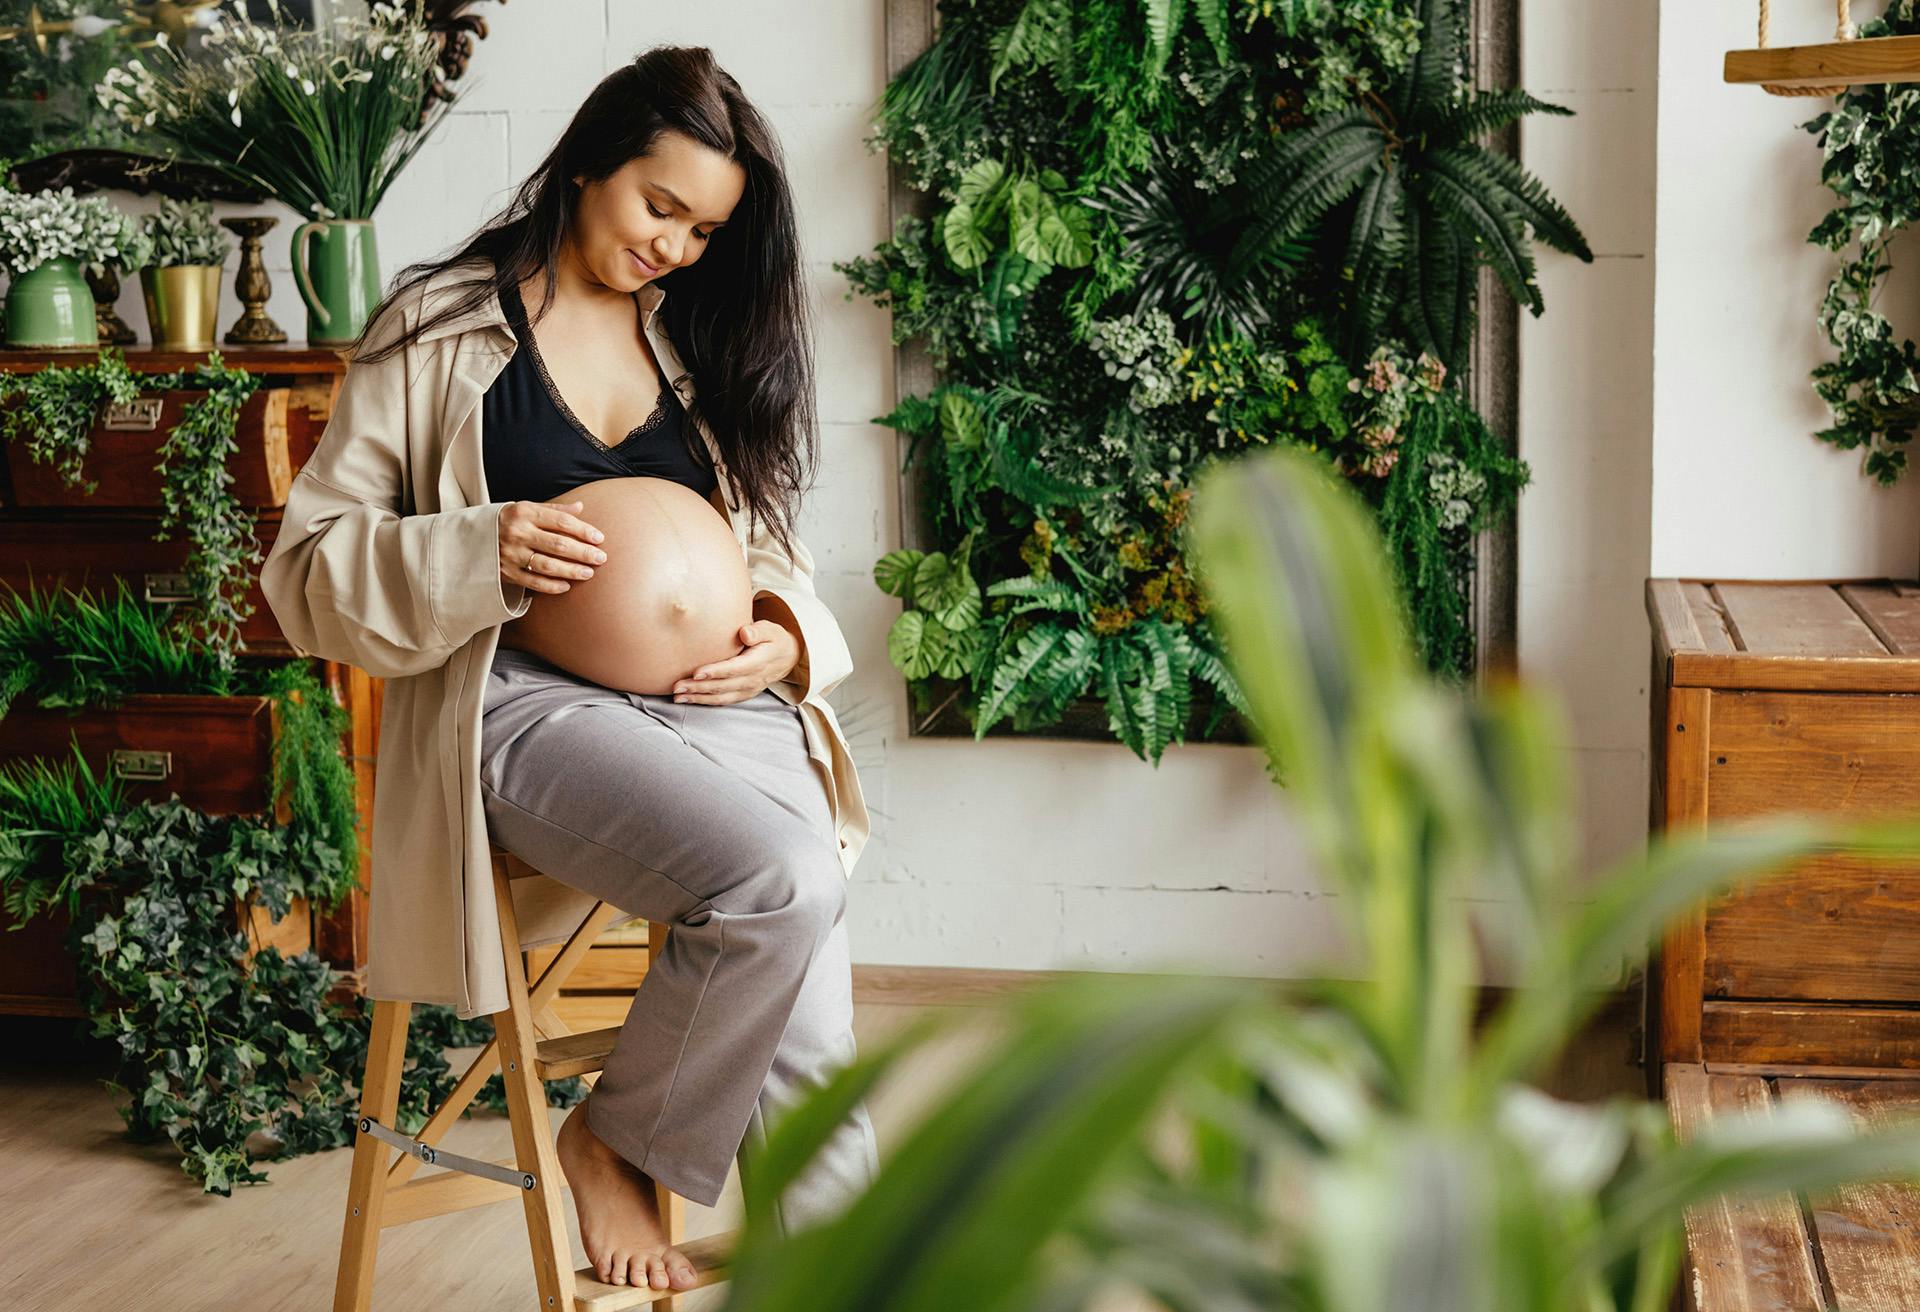 Pregnant Woman in a Room with Plants